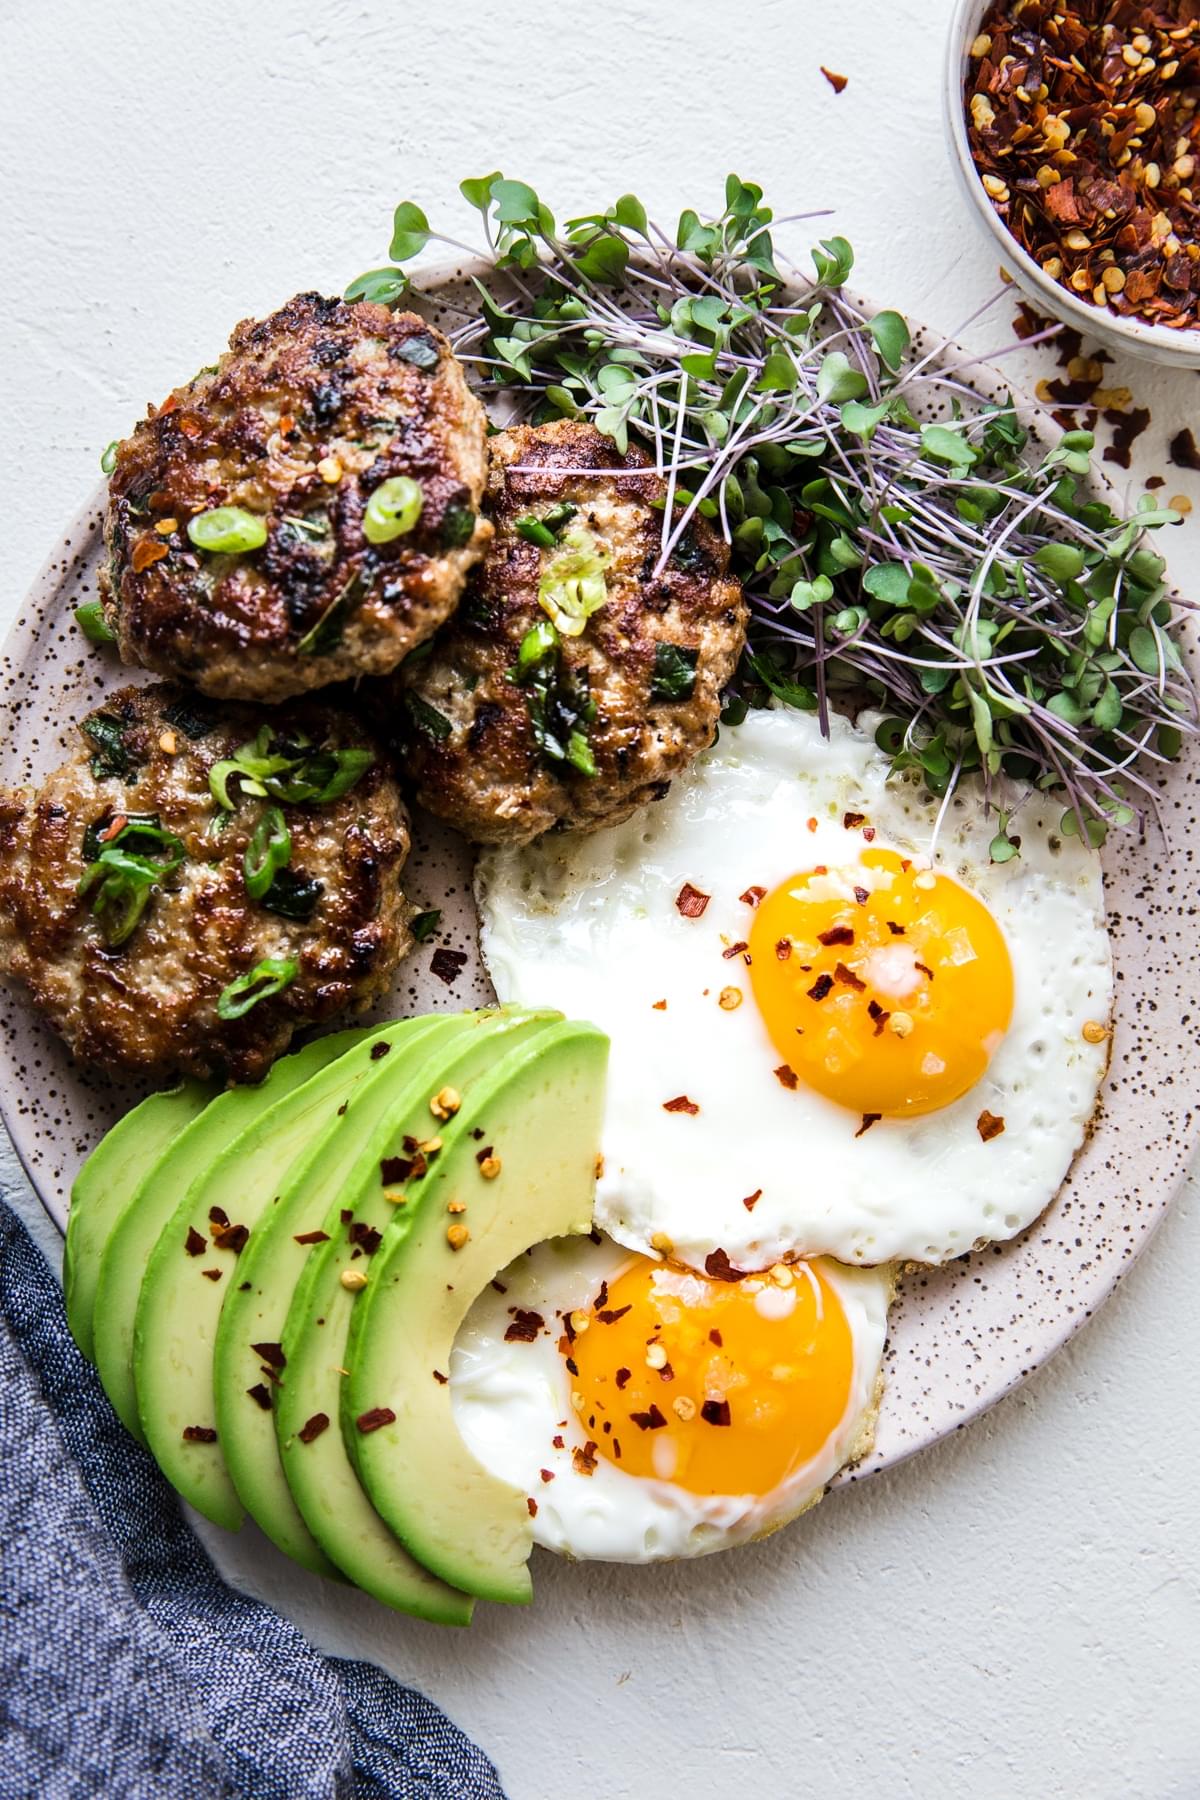 Asian flavored Breakfast Turkey Patties on a plate with eggs, avocados